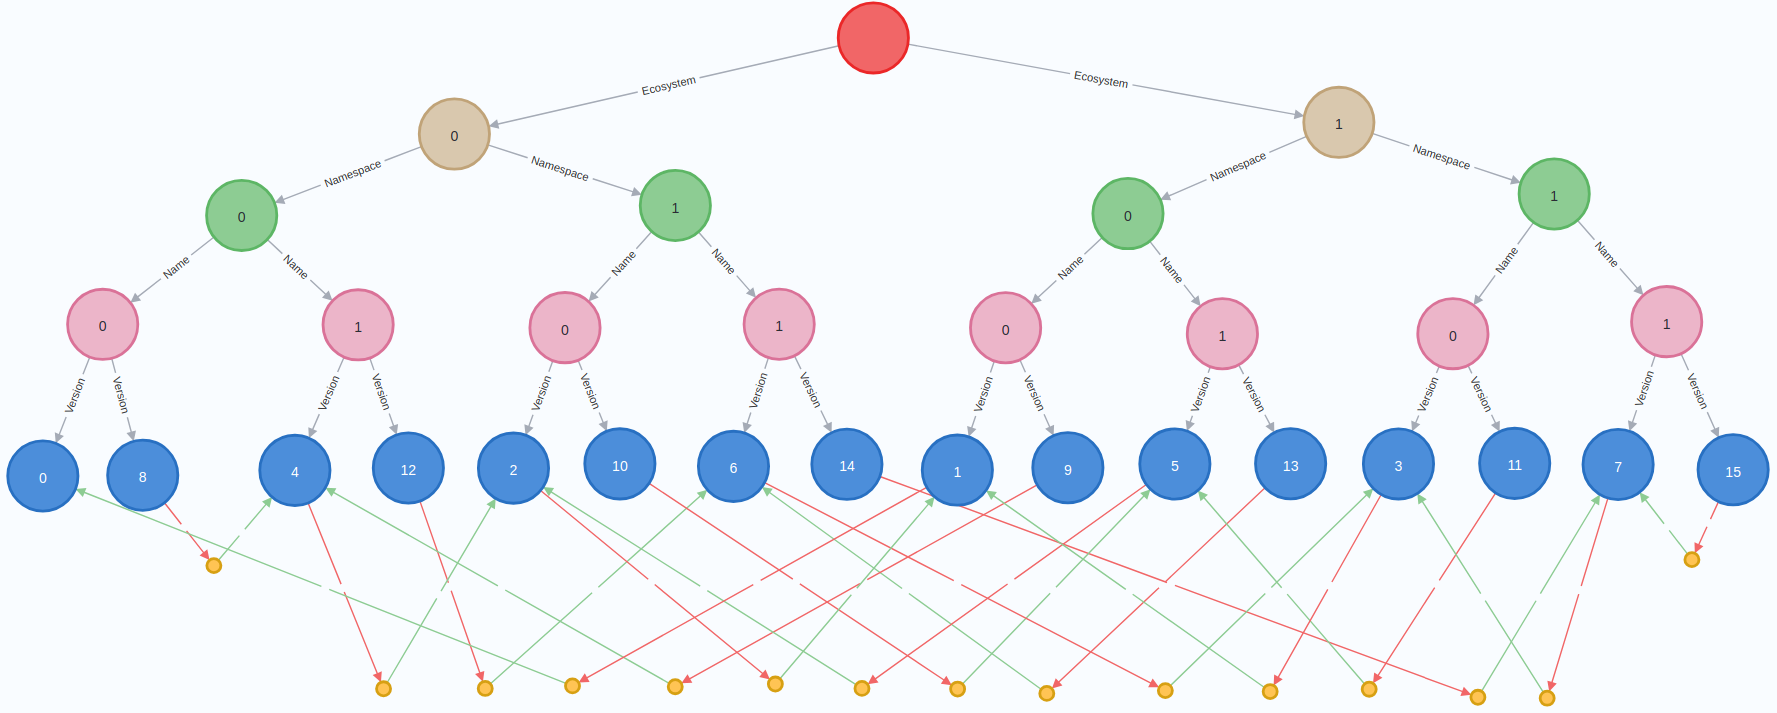 Example of ingested packages for N=16, B=2, K=1, from Neo4j output